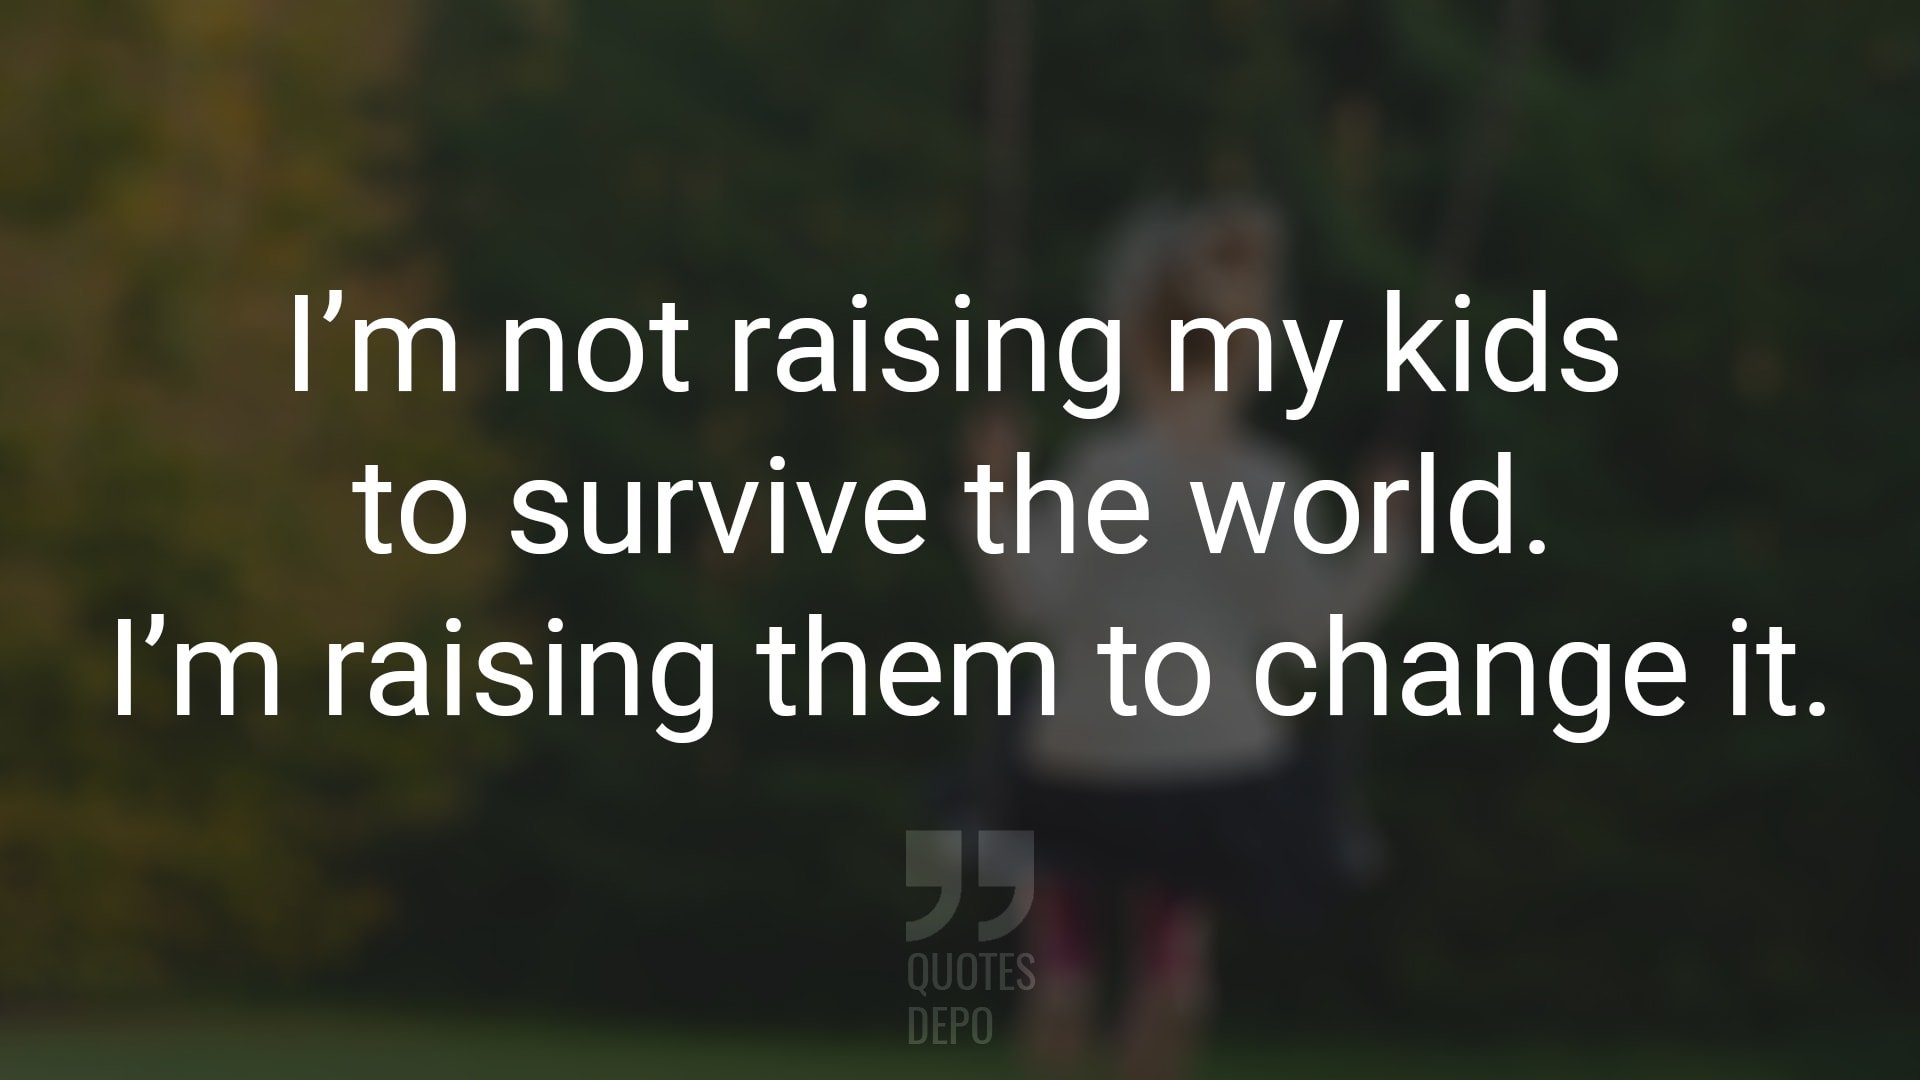 I’m not Raising My Kids to Survive the World